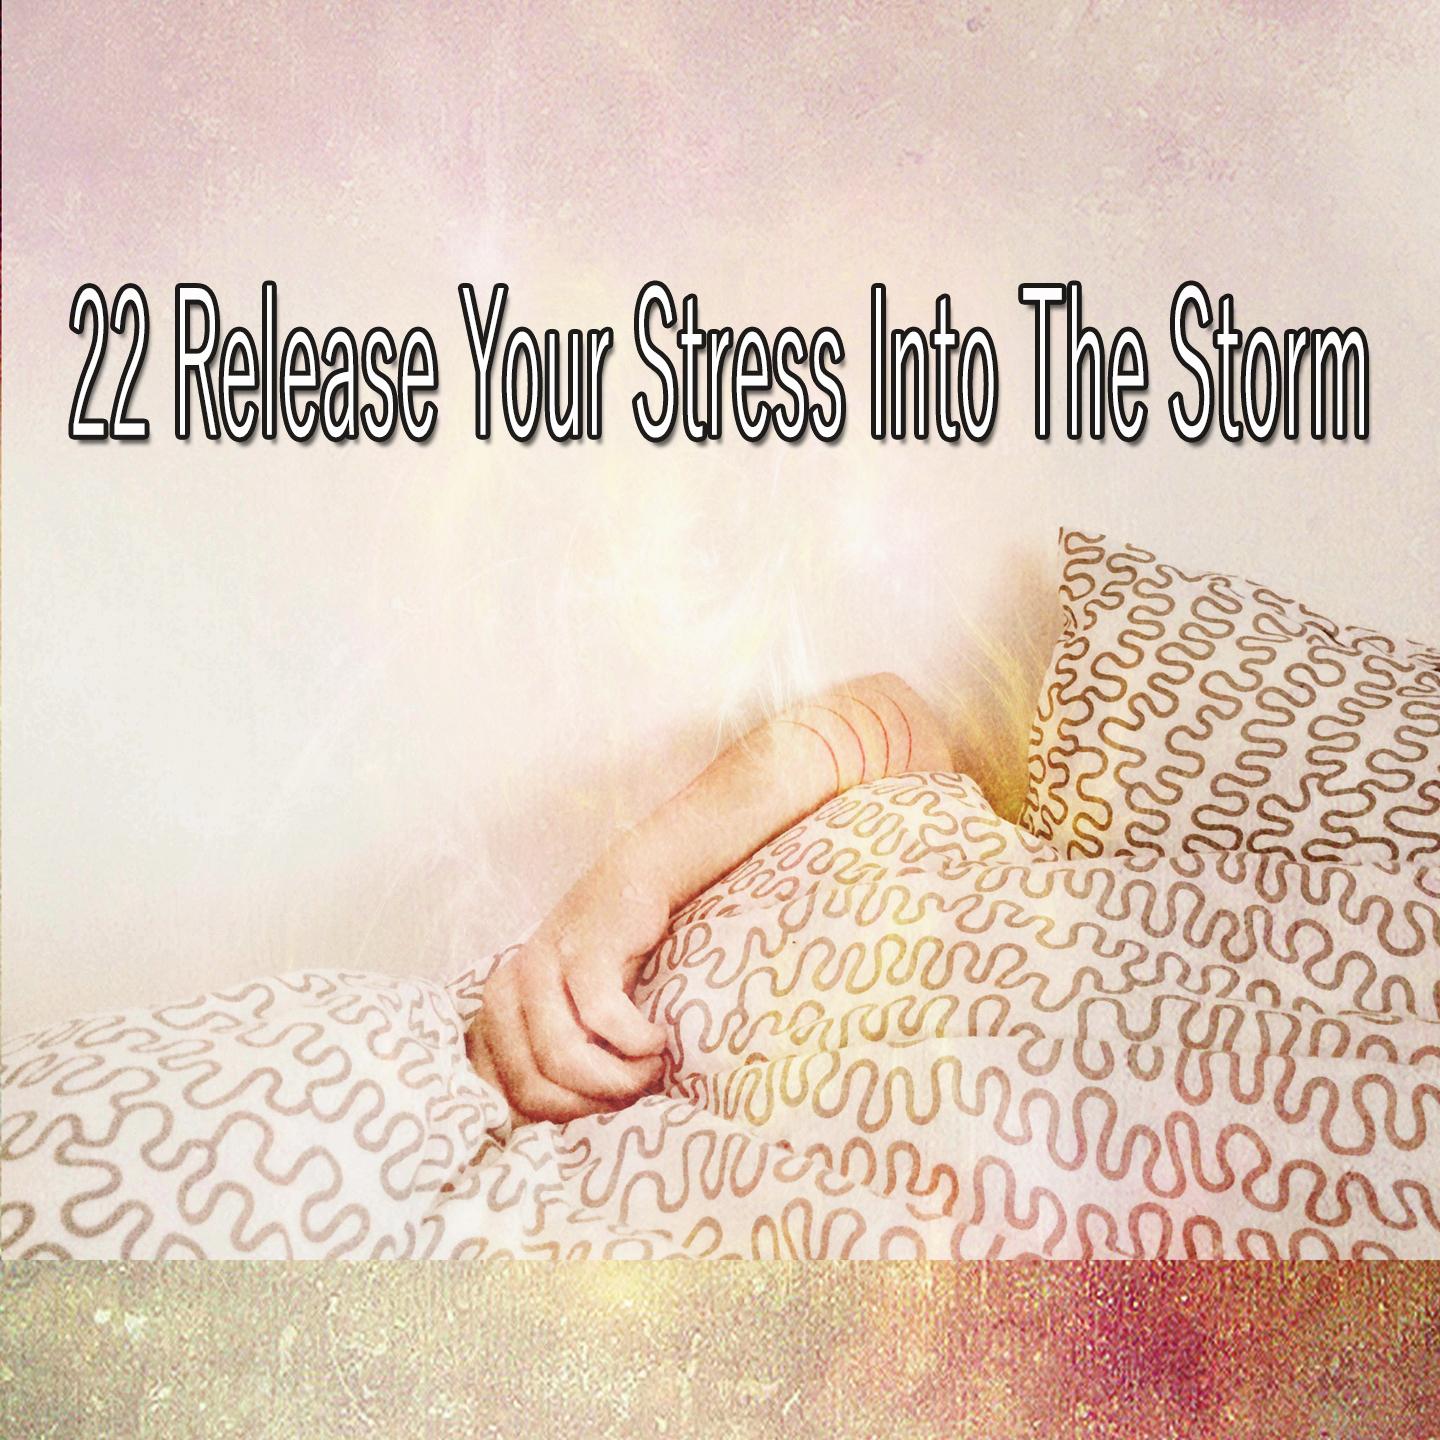 22 Release Your Stress into the Storm